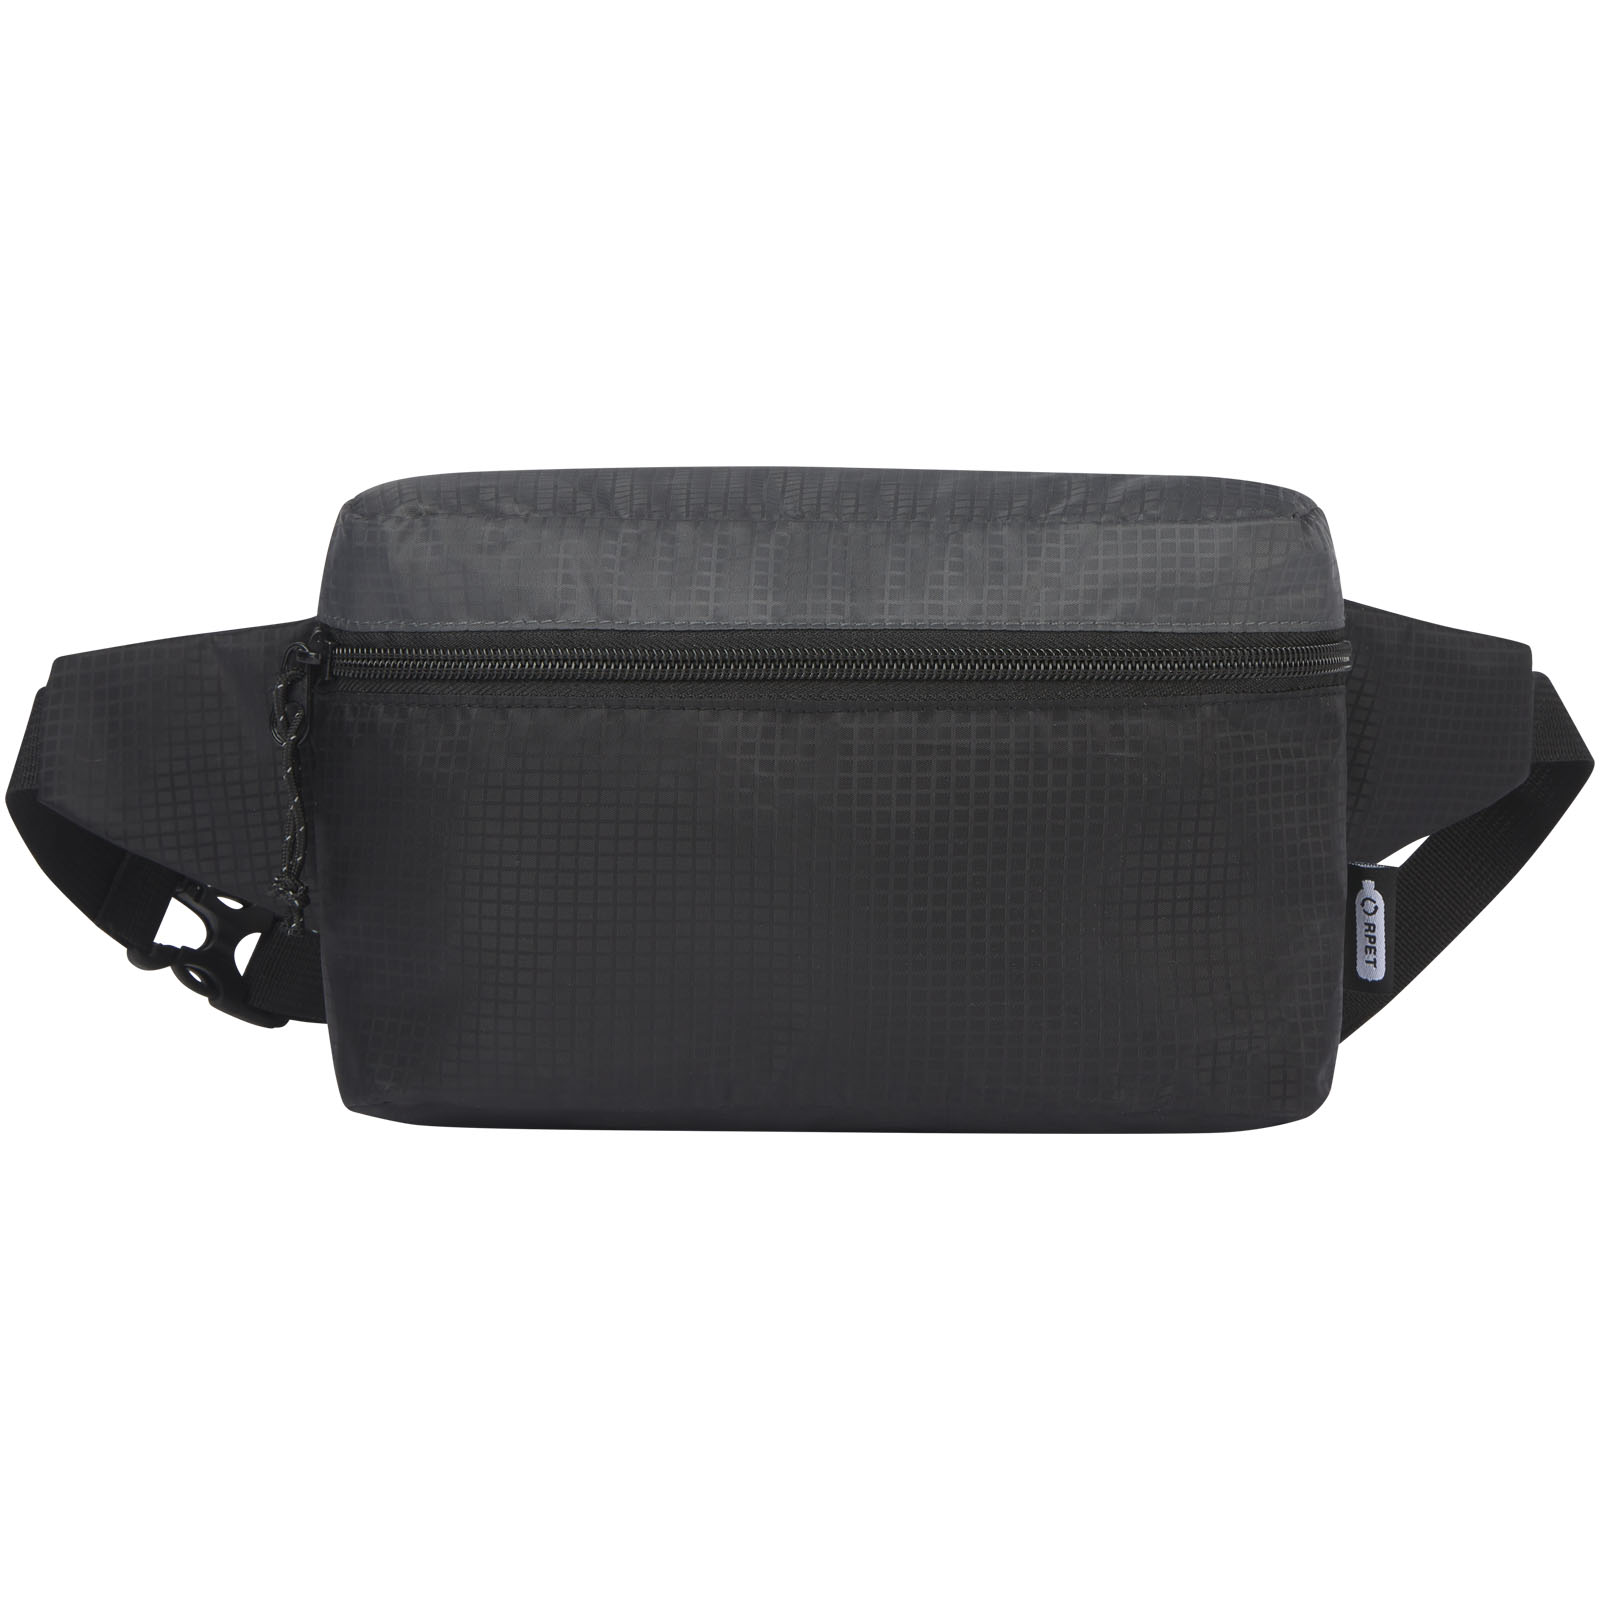 Advertising Travel Accessories - Trailhead GRS recycled lightweight fanny pack 2.5L - 1